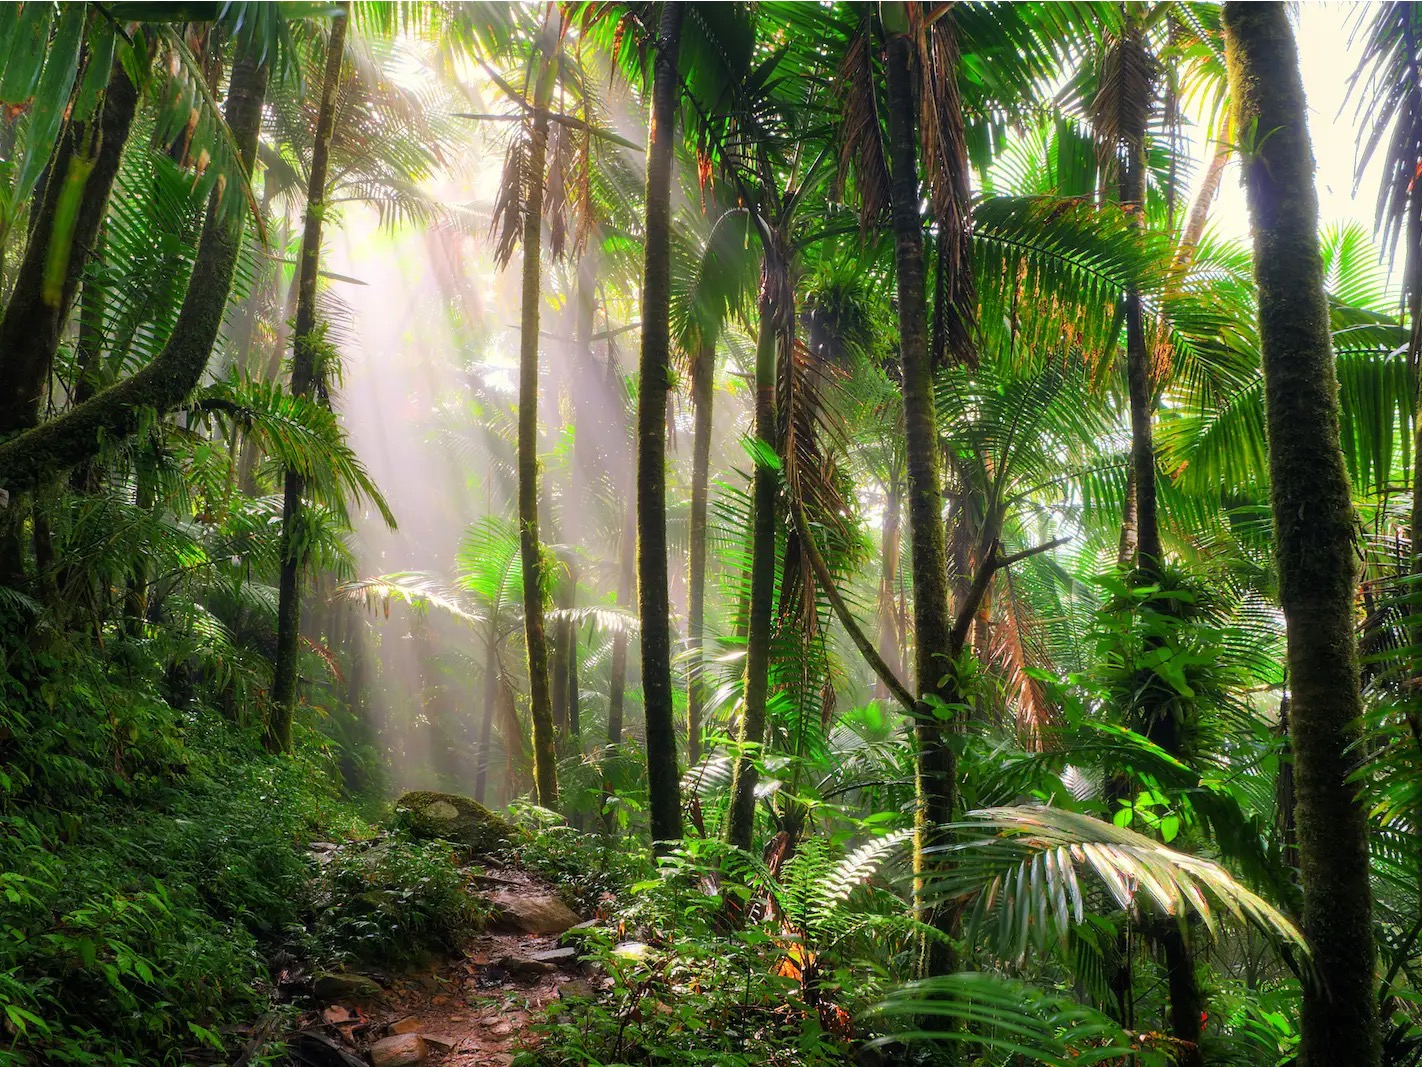 World Environment Day Quiz Tropical rainforest, El Yunque National Forest in Puerto Rico